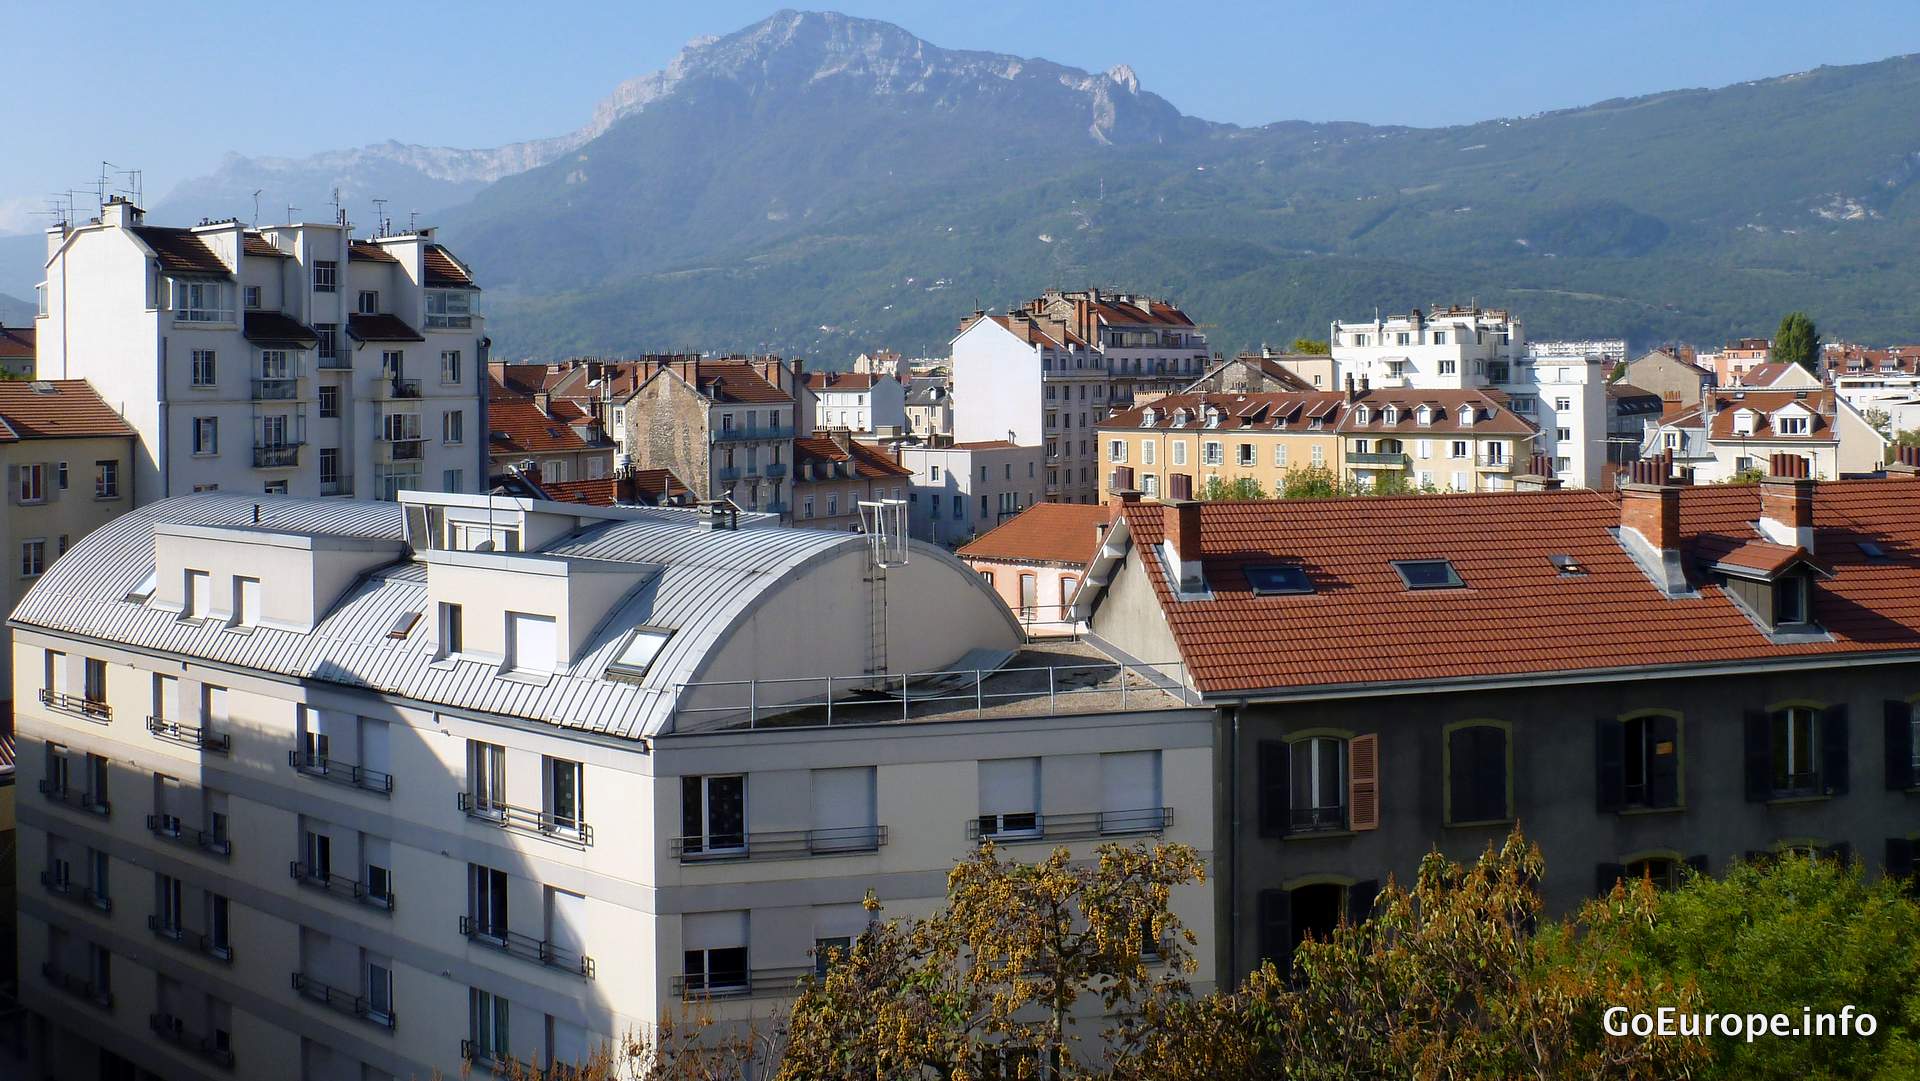 Grenoble a city surrounded with mountains.